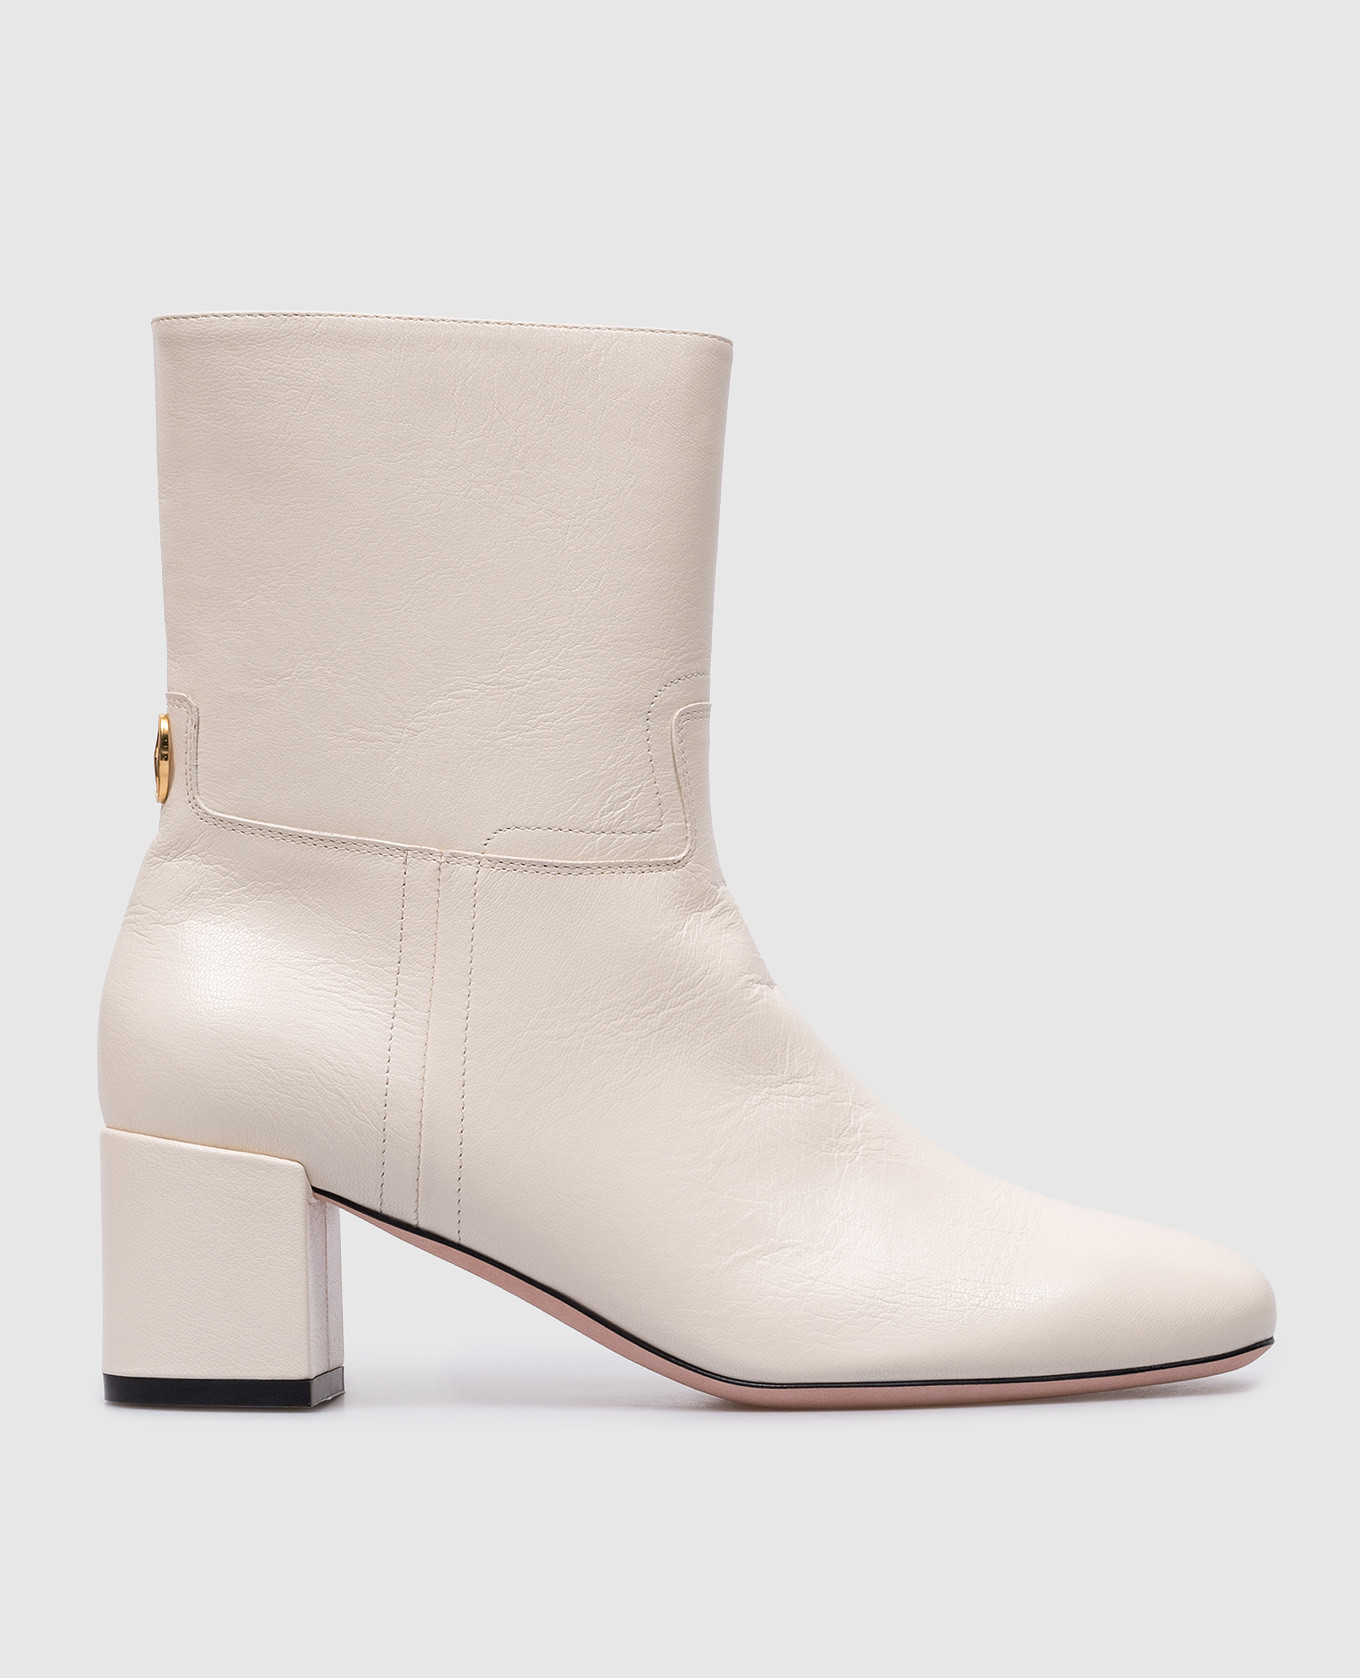 White leather ankle boots by Otavine